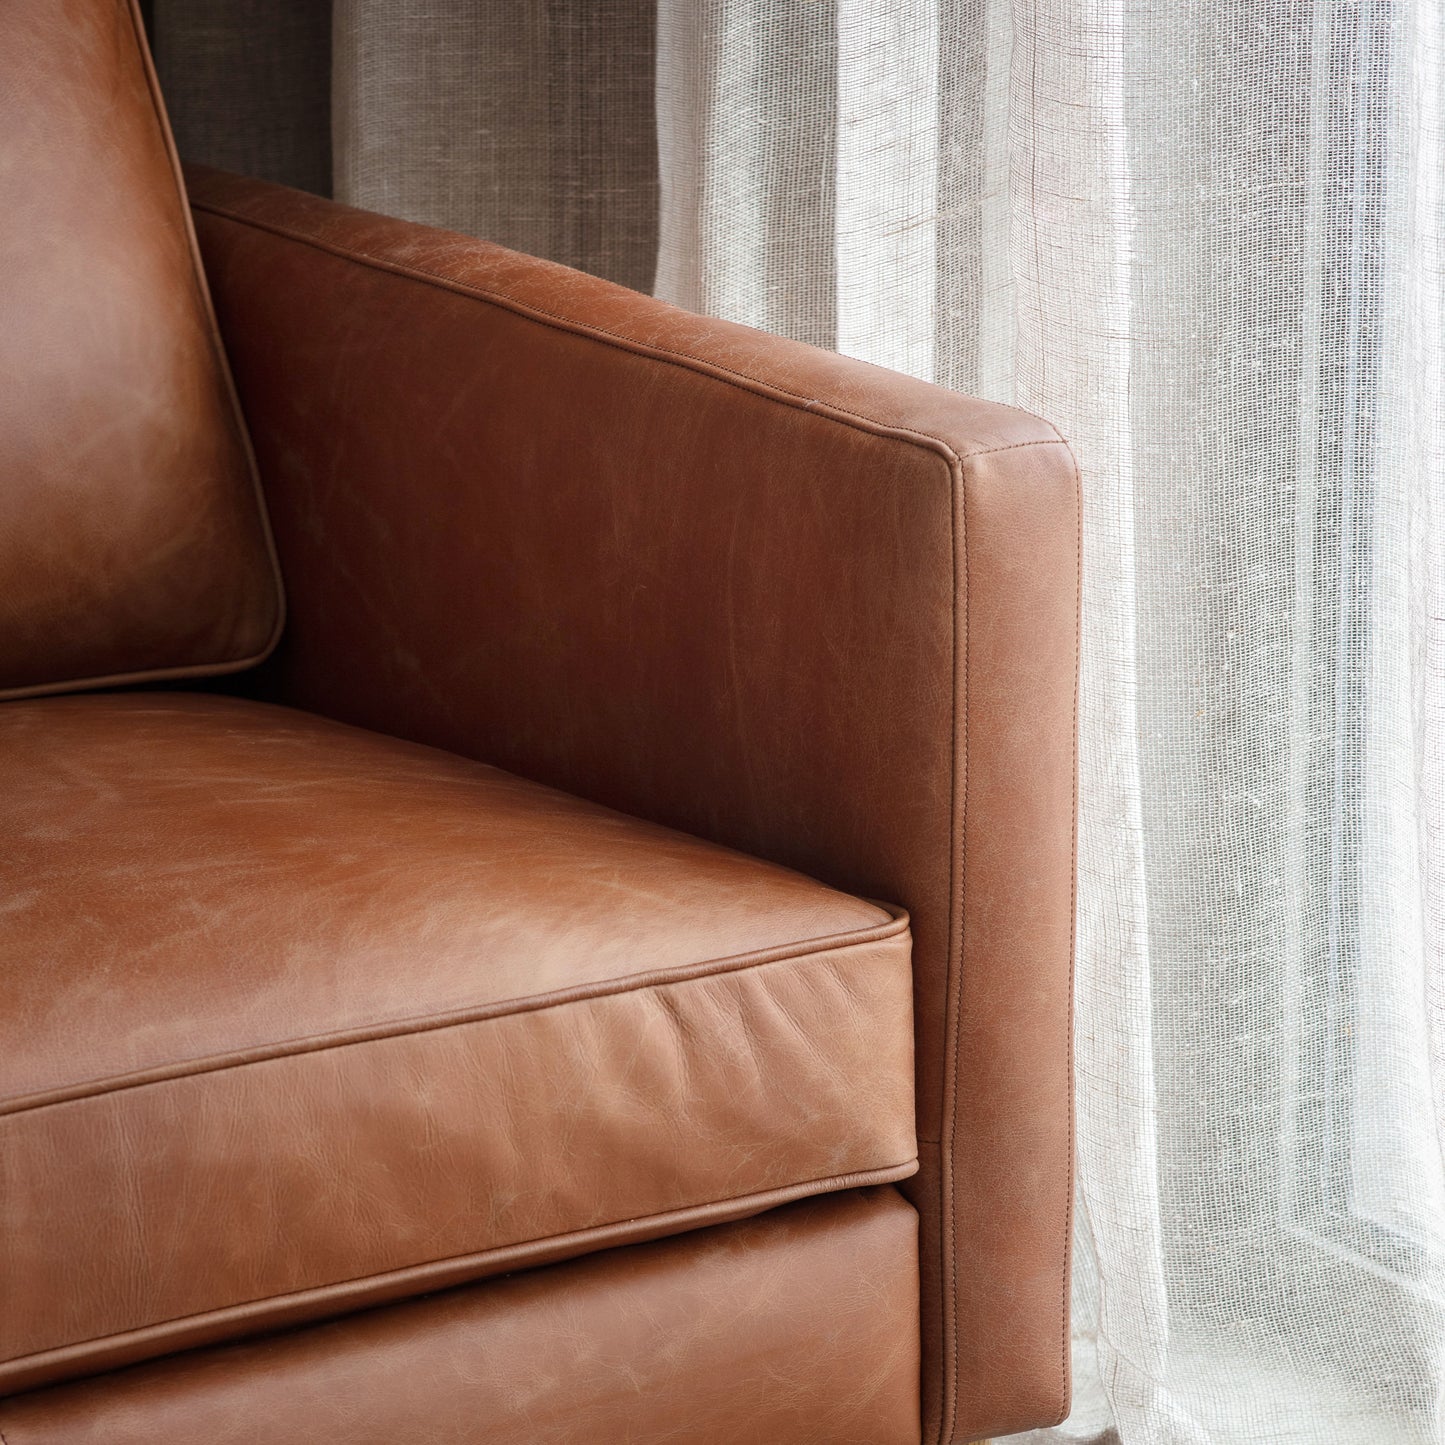 A Vintage Brown Leather Osborne 2 Seater Sofa by Kikiathome.co.uk adds interior decor to a home's furniture arrangement, positioned in front of a window.